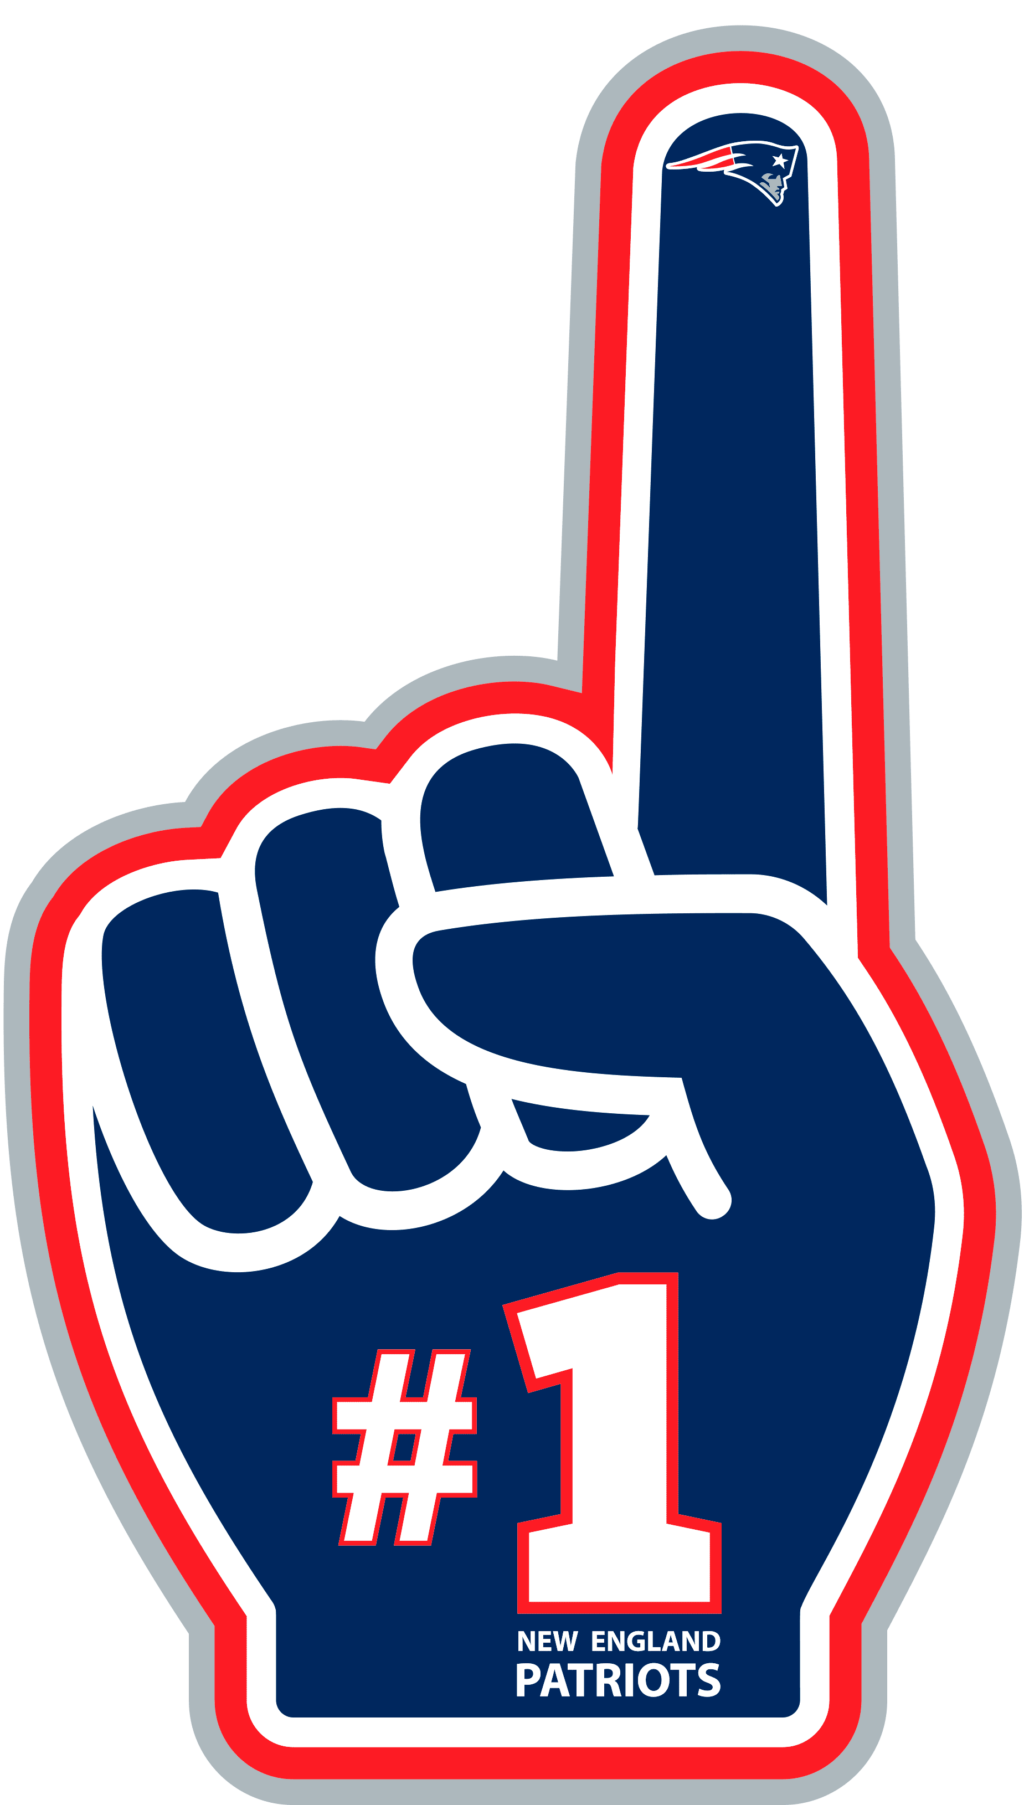 new england patriots 12 12 Styles NFL New England Patriots svg. New England Patriots svg, eps, dxf, png. New England Patriots Vector Logo Clipart, New England Patriots Clipart svg, Files For Silhouette, New England Patriots Images Bundle, New England Patriots Cricut files, Instant Download.